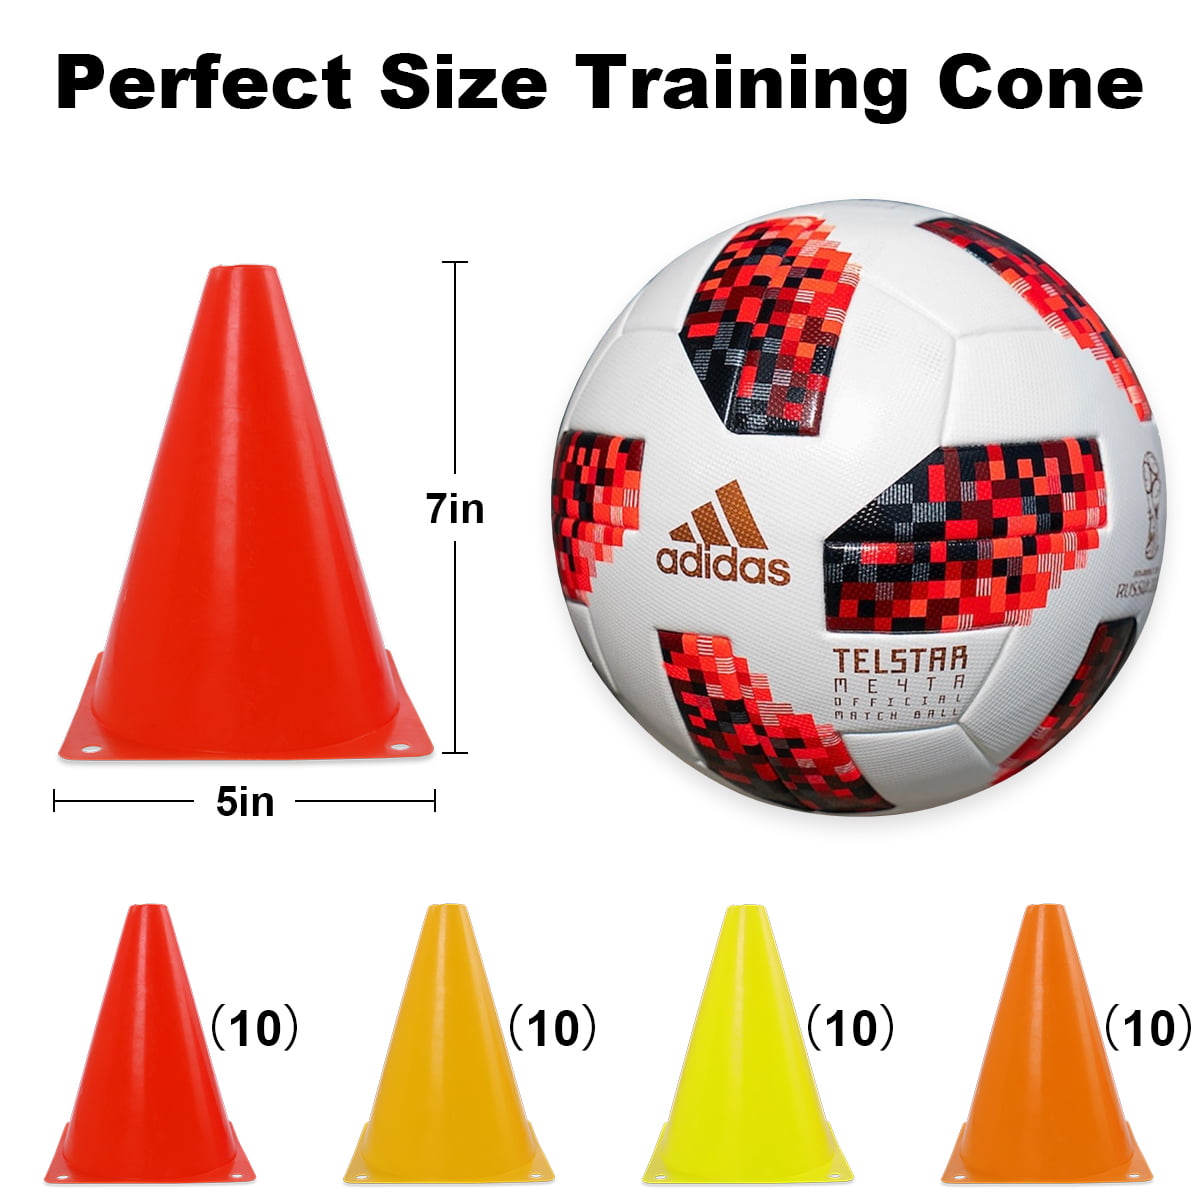 Tangshi Traffic Cones 5 Colors Training Cones Soccer Sport Cones for Indoor Outdoor Activity and Festive Events Conical Obstacle Bar Bucket Sign Barrier with Holes 